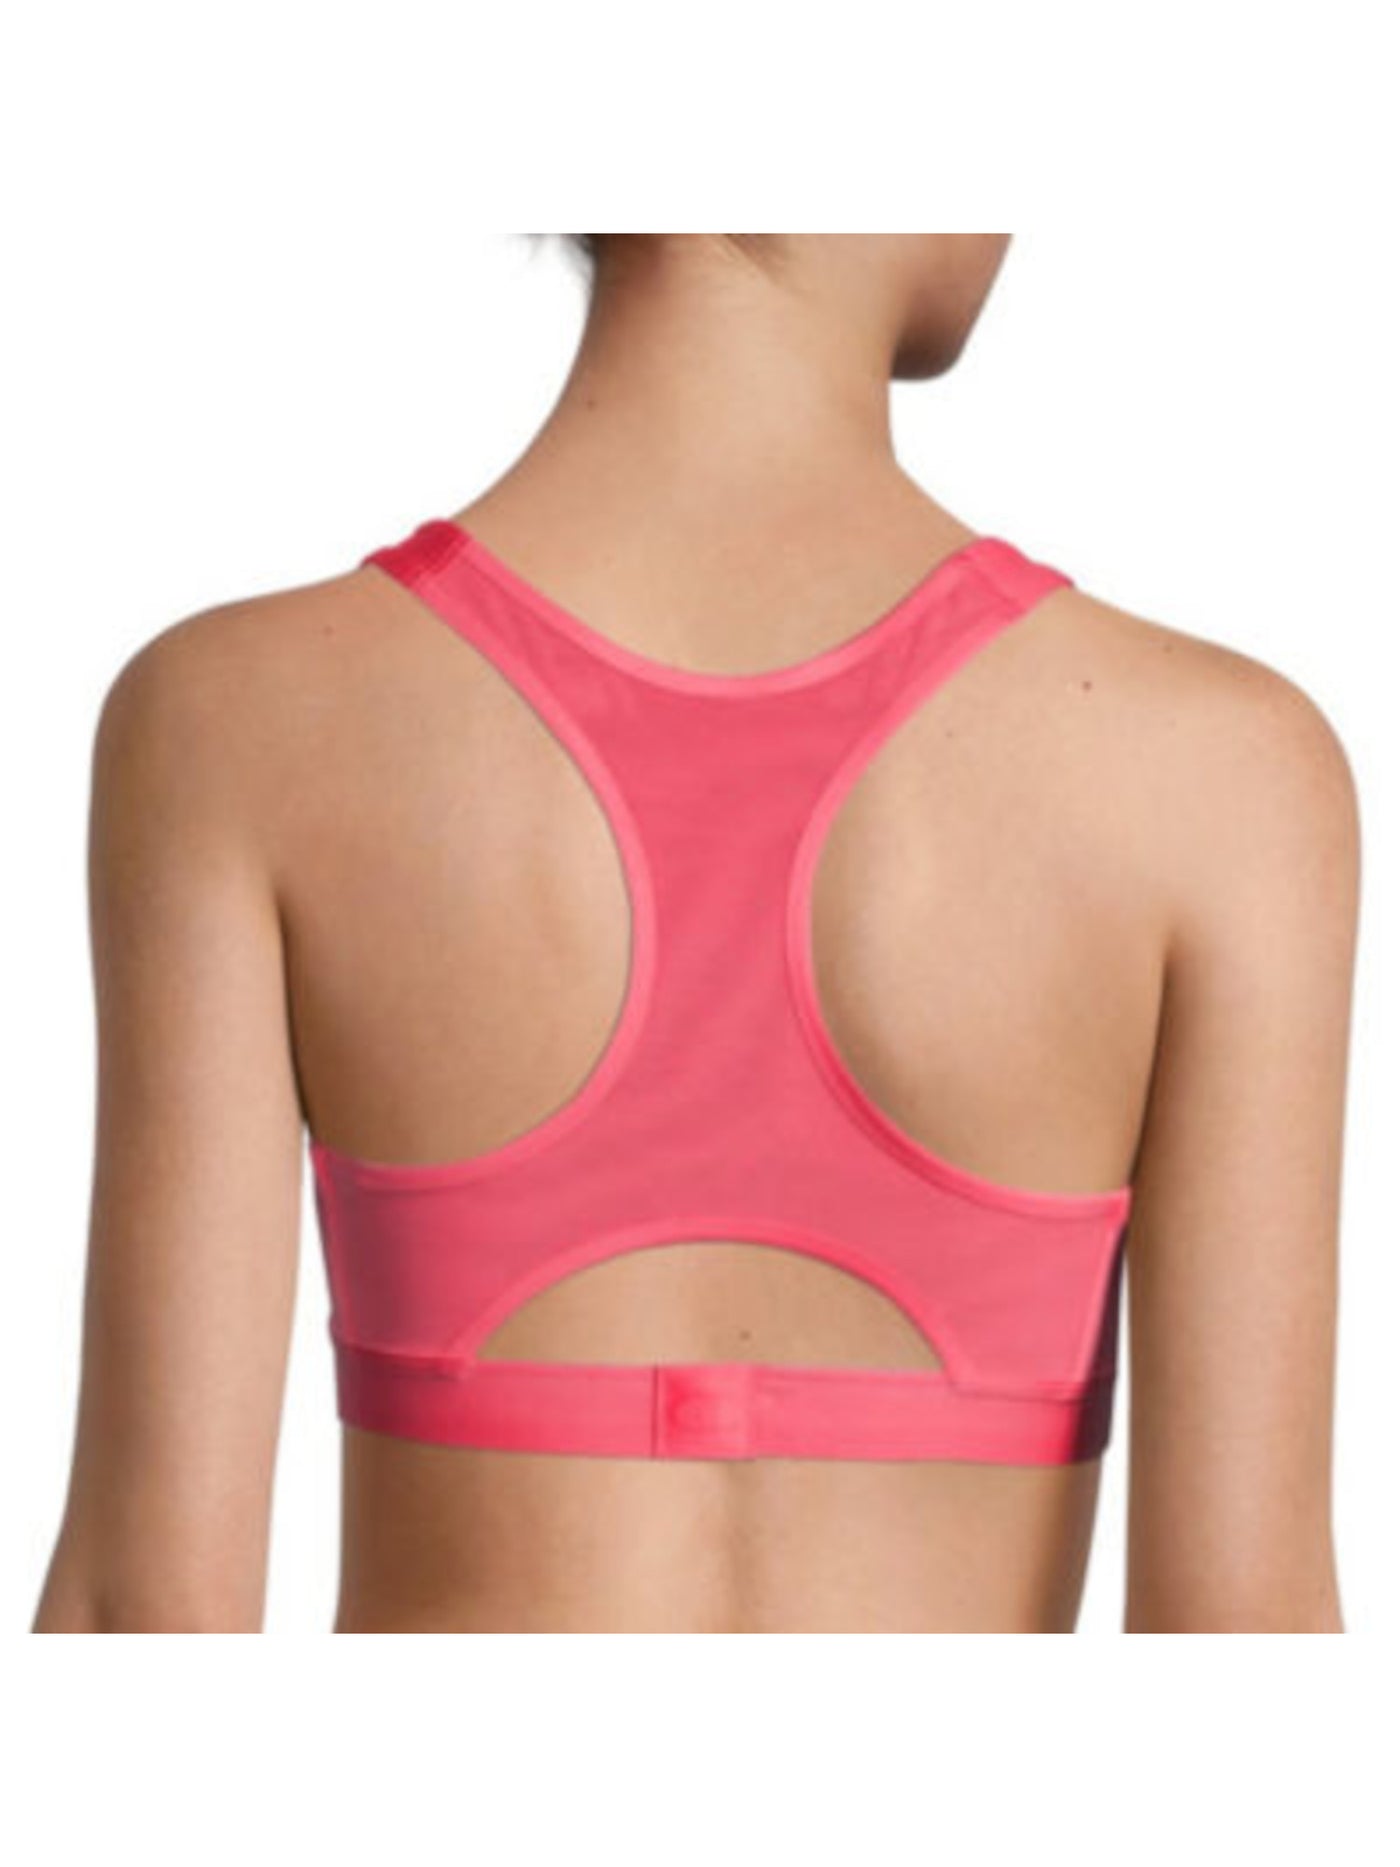 CHAMPION Intimates Pink Stretch Racerback Cut Out Sports Bra S